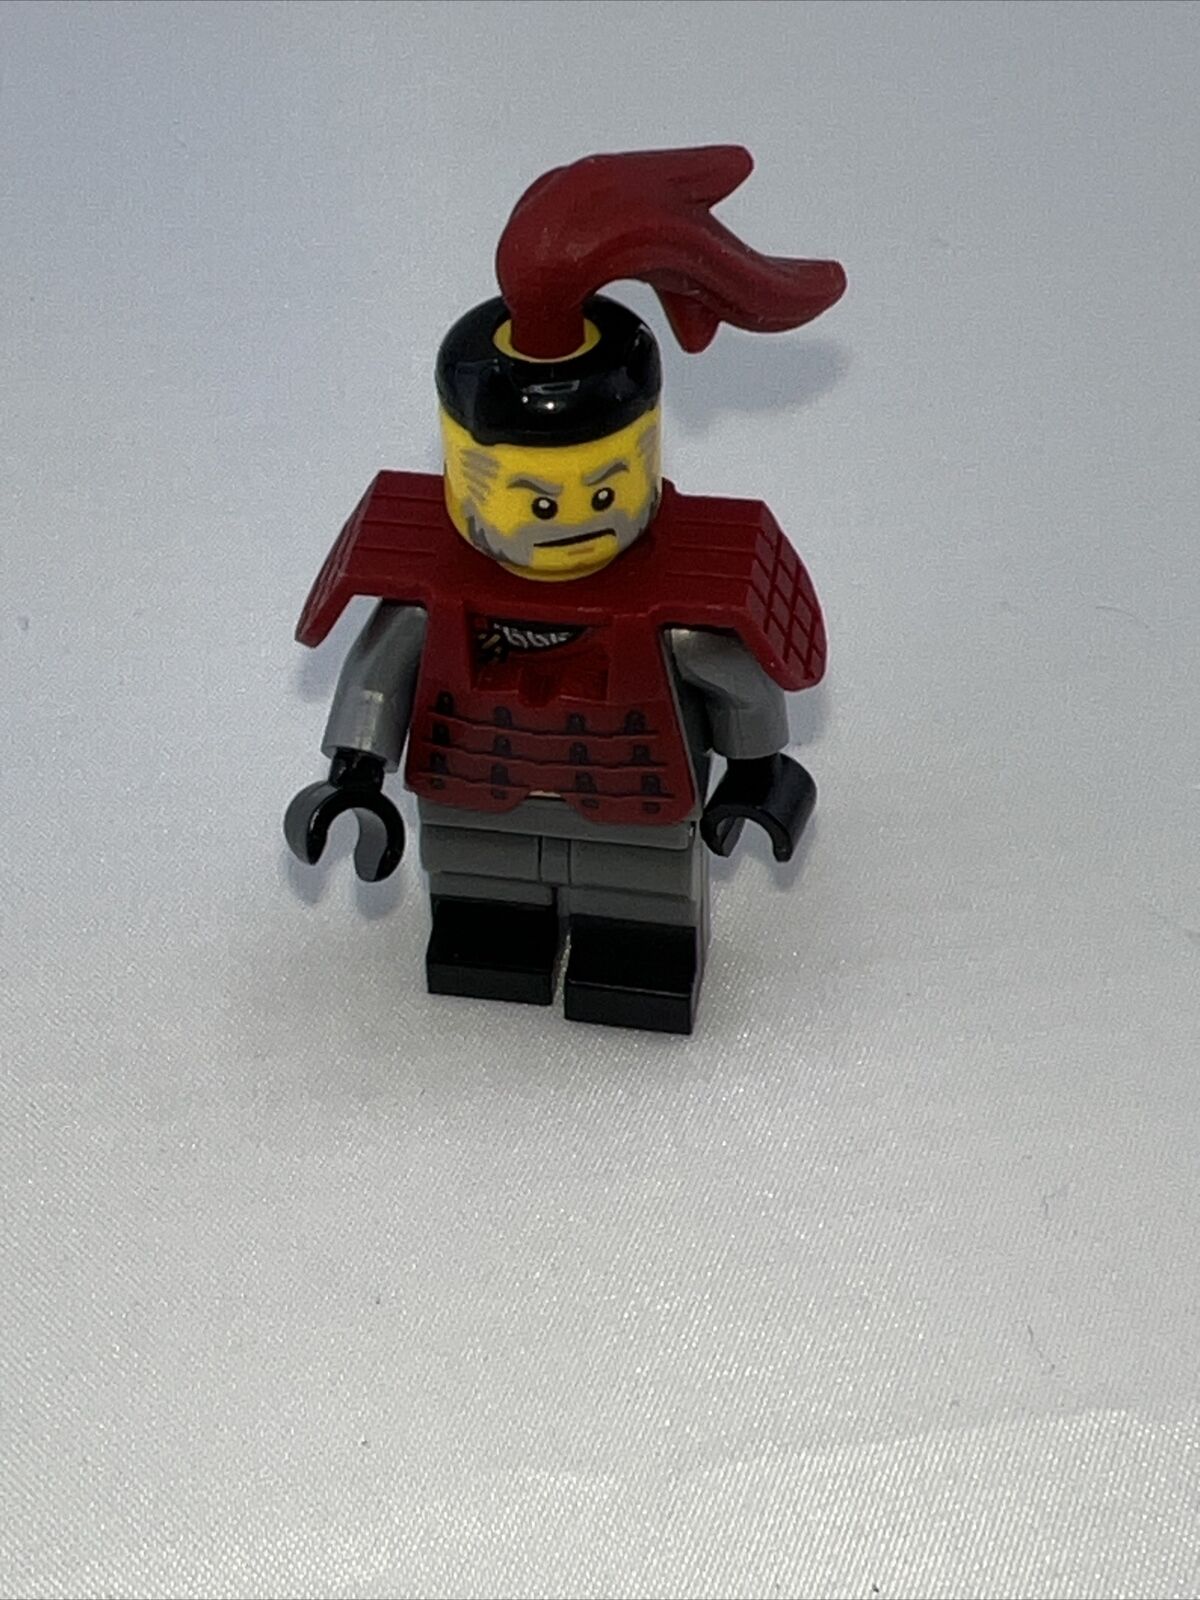 Lego Bam Red Falcon Minifigure with red armor in 3rd picture